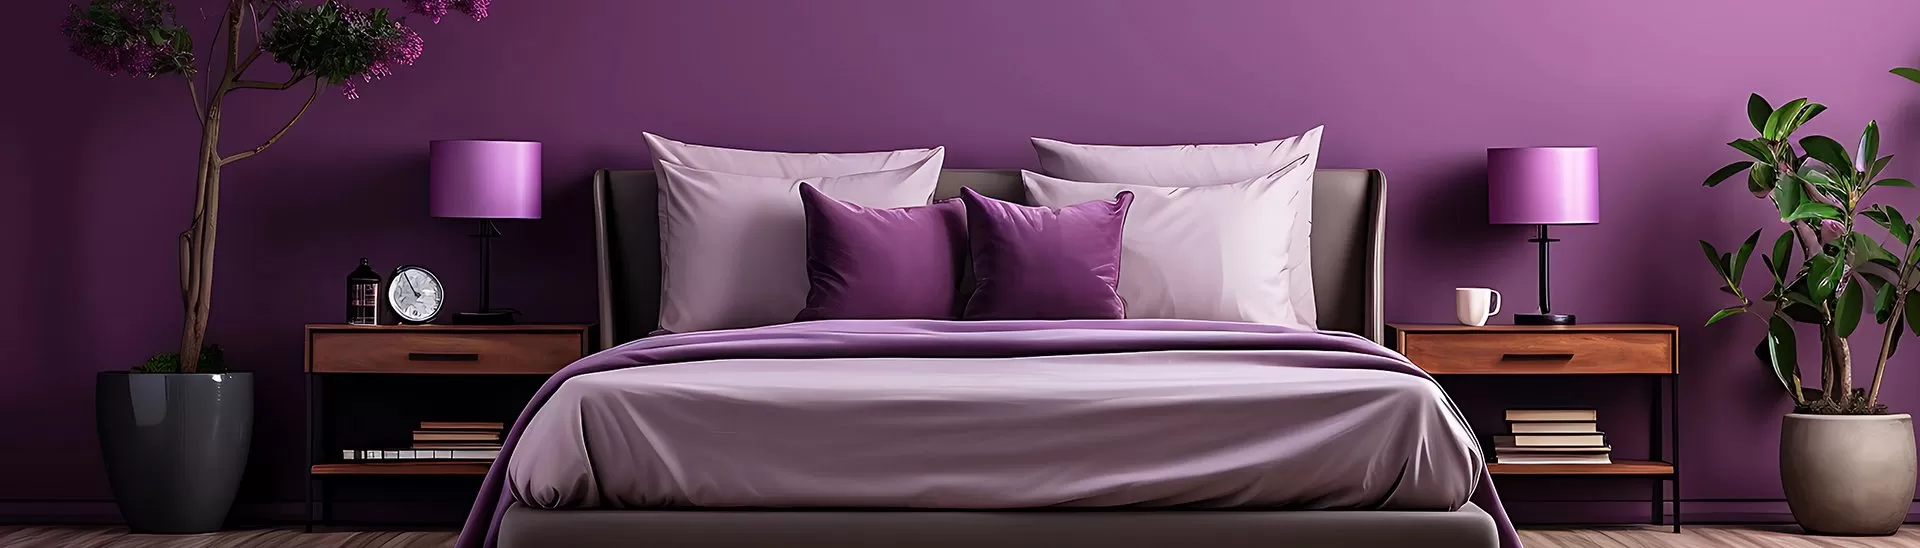 How to Create Purple Colour for Your Walls? 